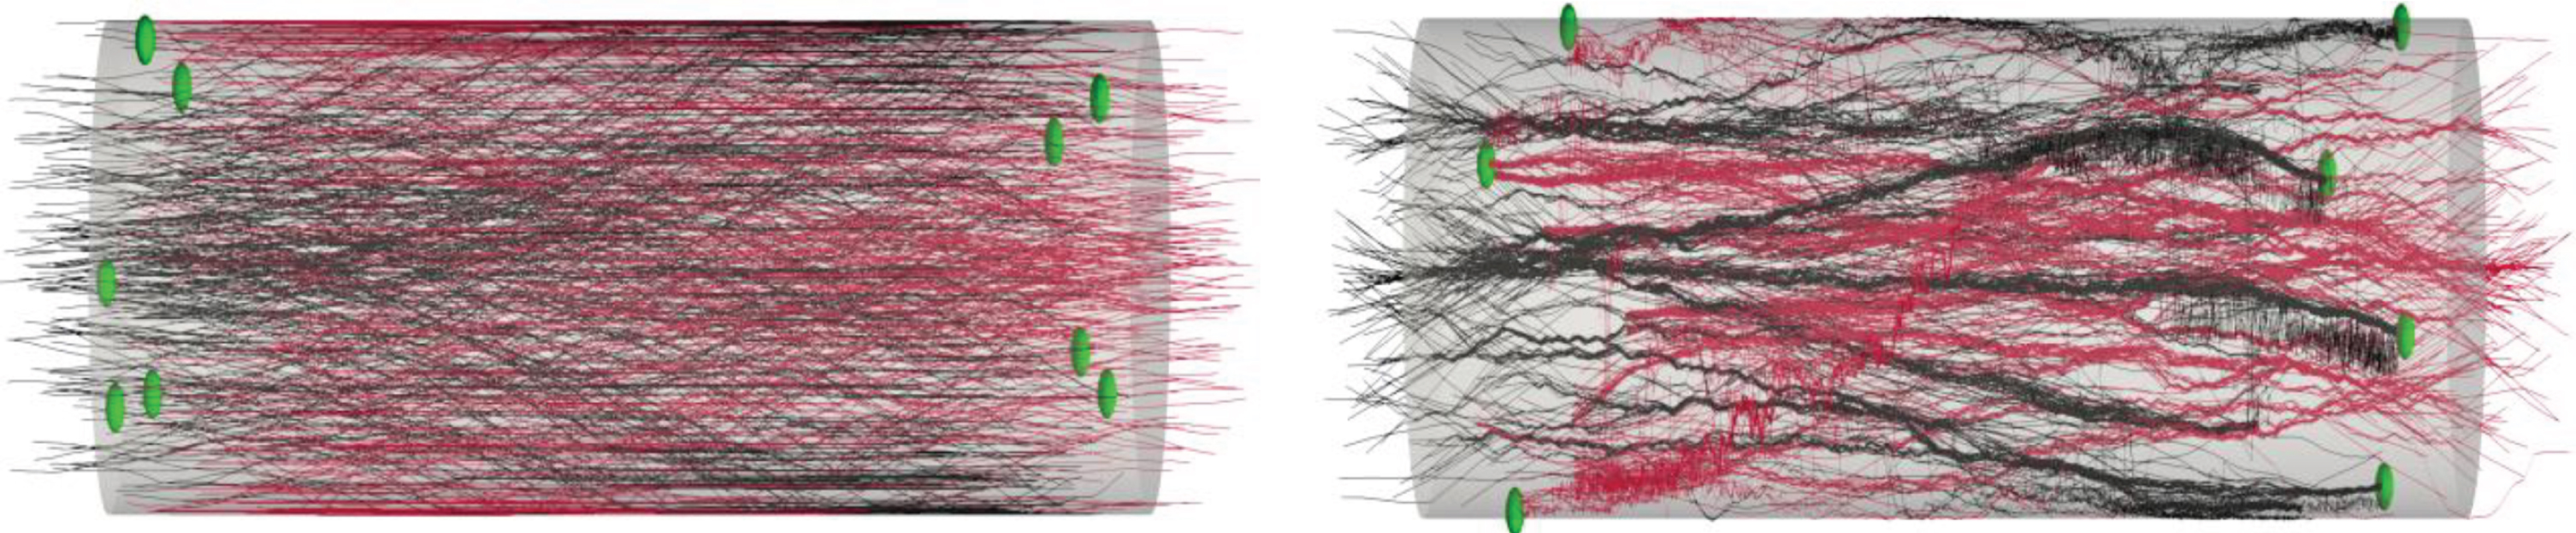 Growth pattern and synapses examples. Illustration of synaptic formation close to the cells aggregate. The spheres indicate the synapses location. We consider that a synapse is formed when 2 fibers are closer than a threshold distance of 0.5 μm. Synapses occur close to the aggregate (within 100 μm). The connectivity information is extracted for the spiking network simulation. (A) The output image of the model: synaptic formation in bidirectional micro-TENNs without axonal bundles. (B) The output image of the model: synaptic formation in bidirectional micro-TENNs with axonal bundles.